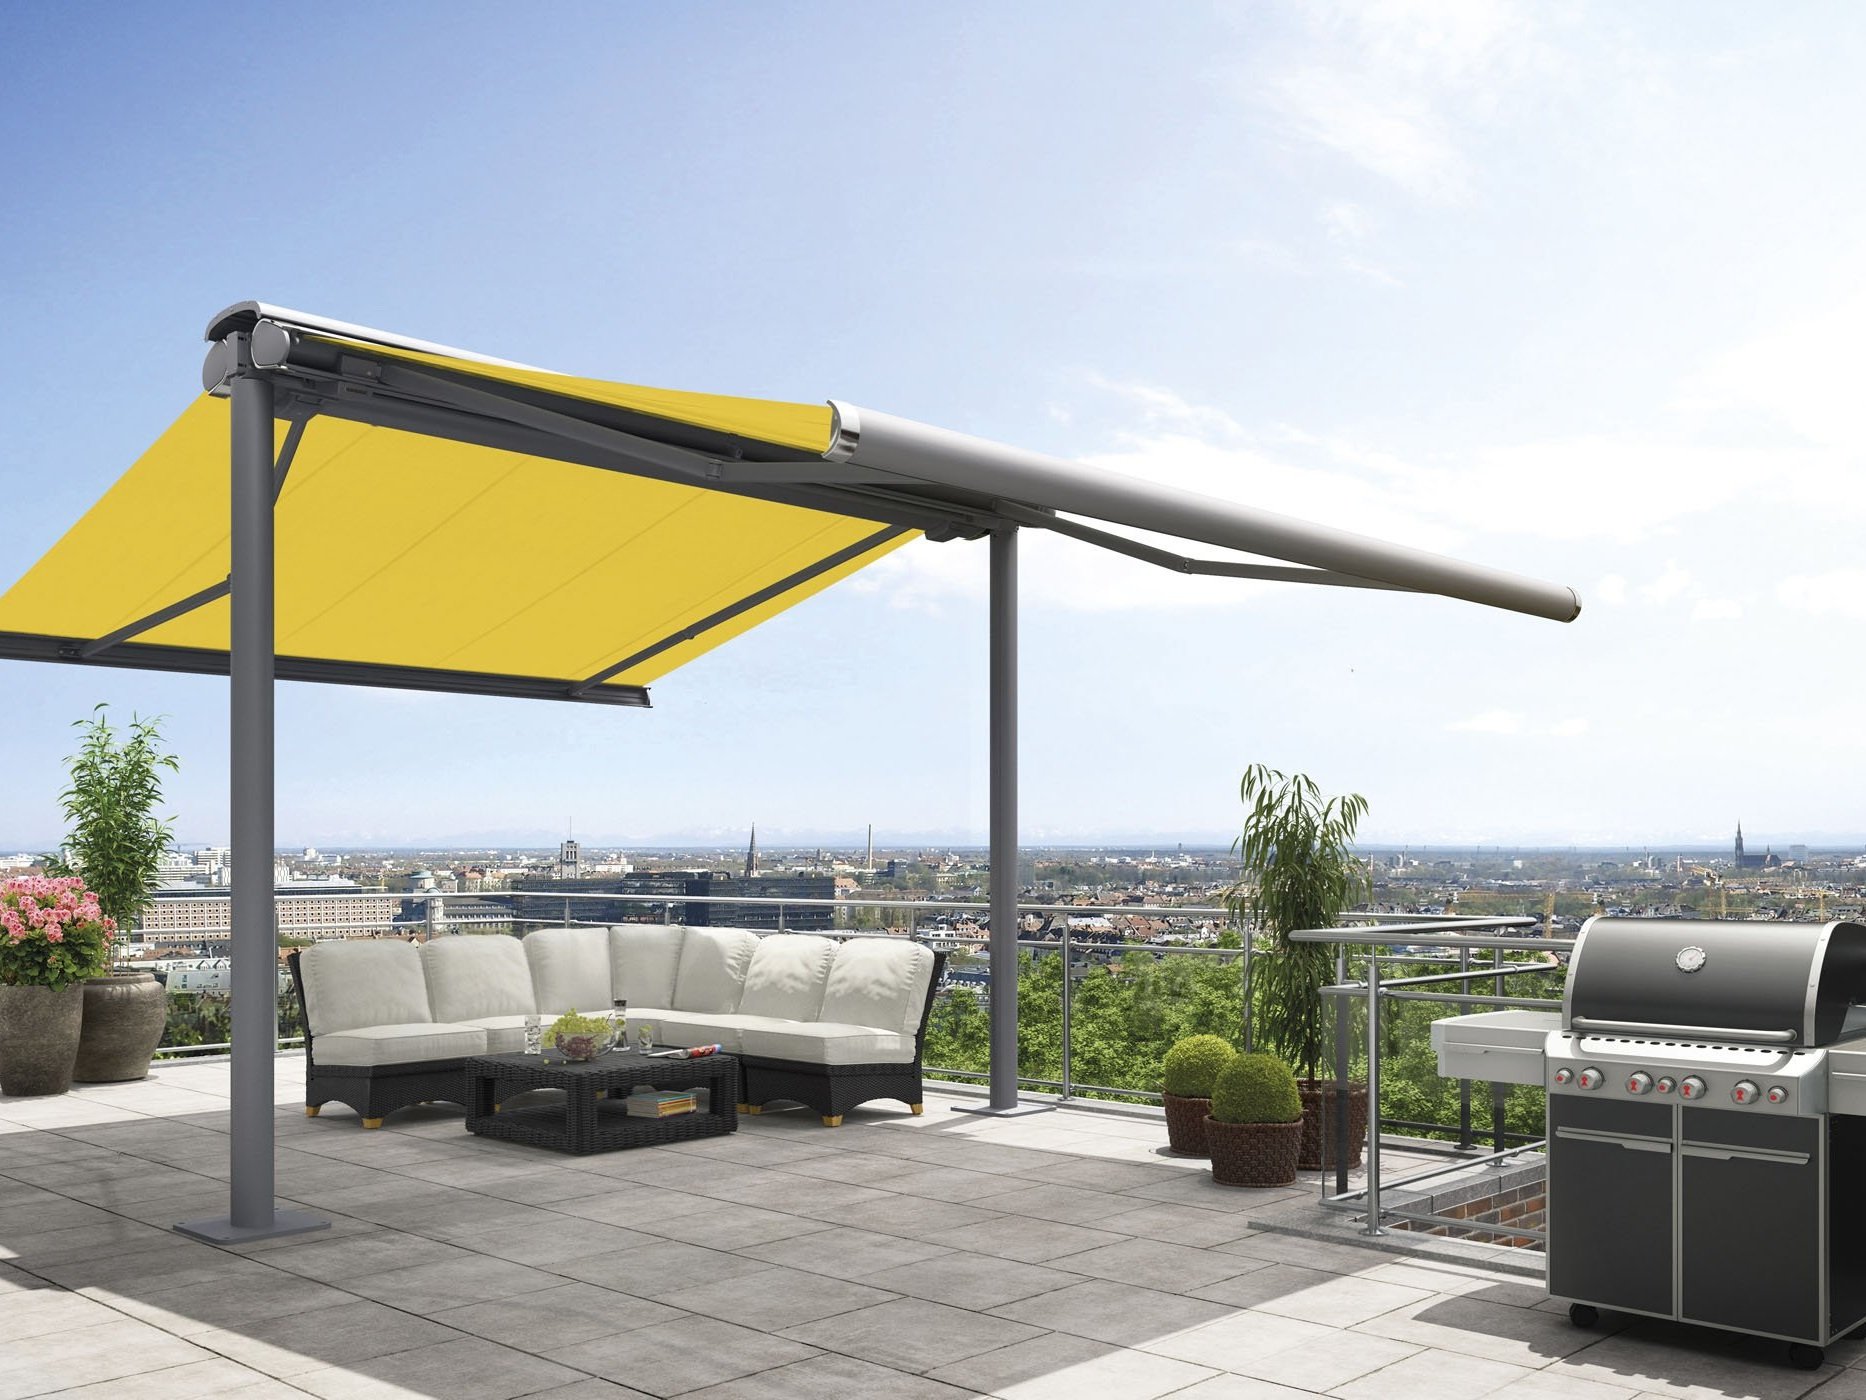 Free-standing+awning+system+markilux+syncra+with+two+awnings+with+yellow+fabric+cover+on+a+roof+terrace..jpg